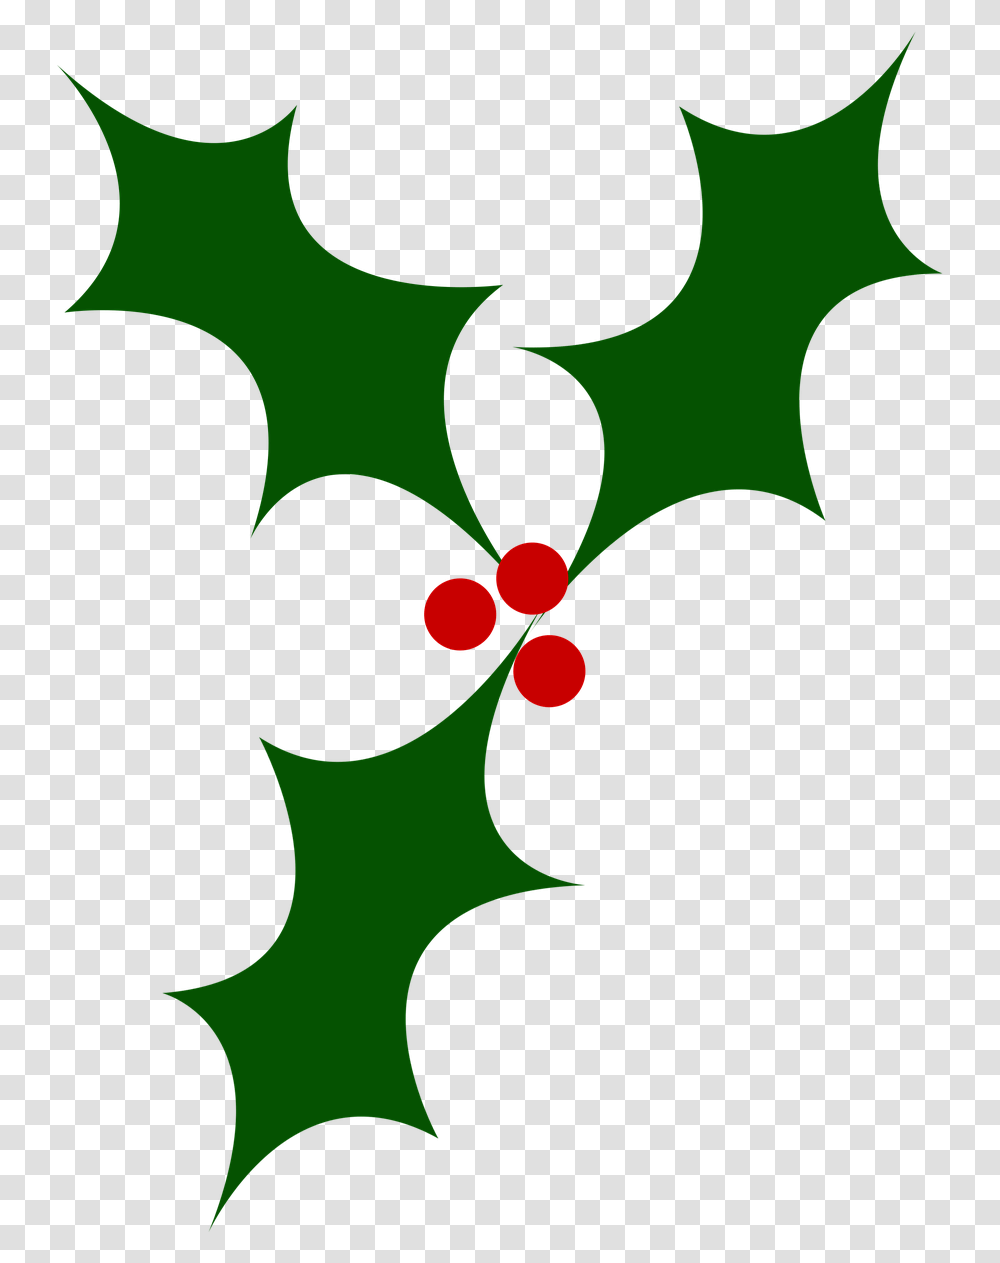 Holly Christmas Tree Berry Image Holly Berry Leaves Svg, Symbol, Leaf, Plant, Person Transparent Png